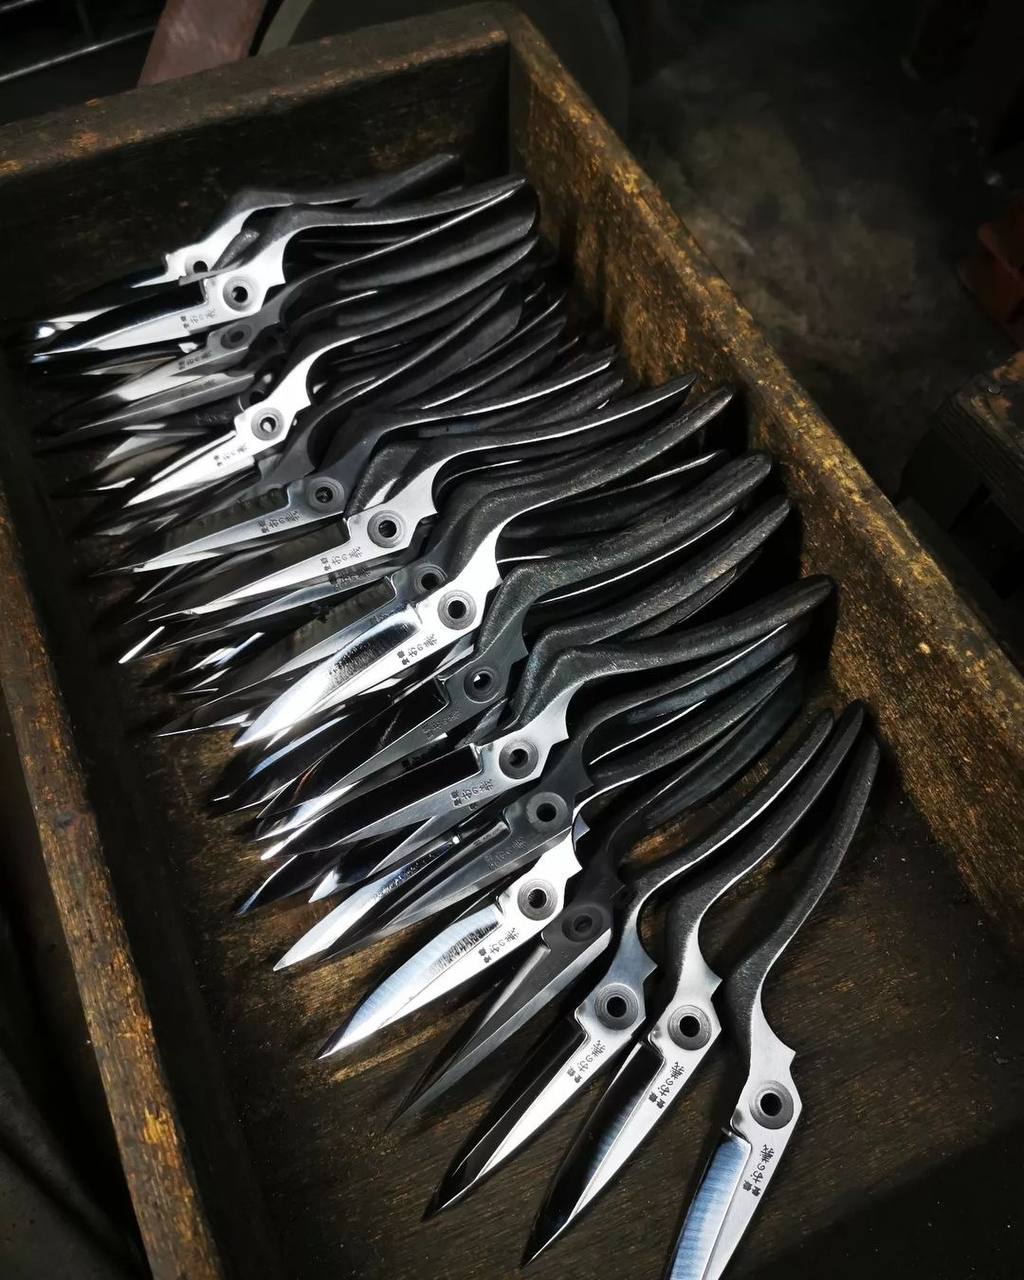 Japanese secateurs in production